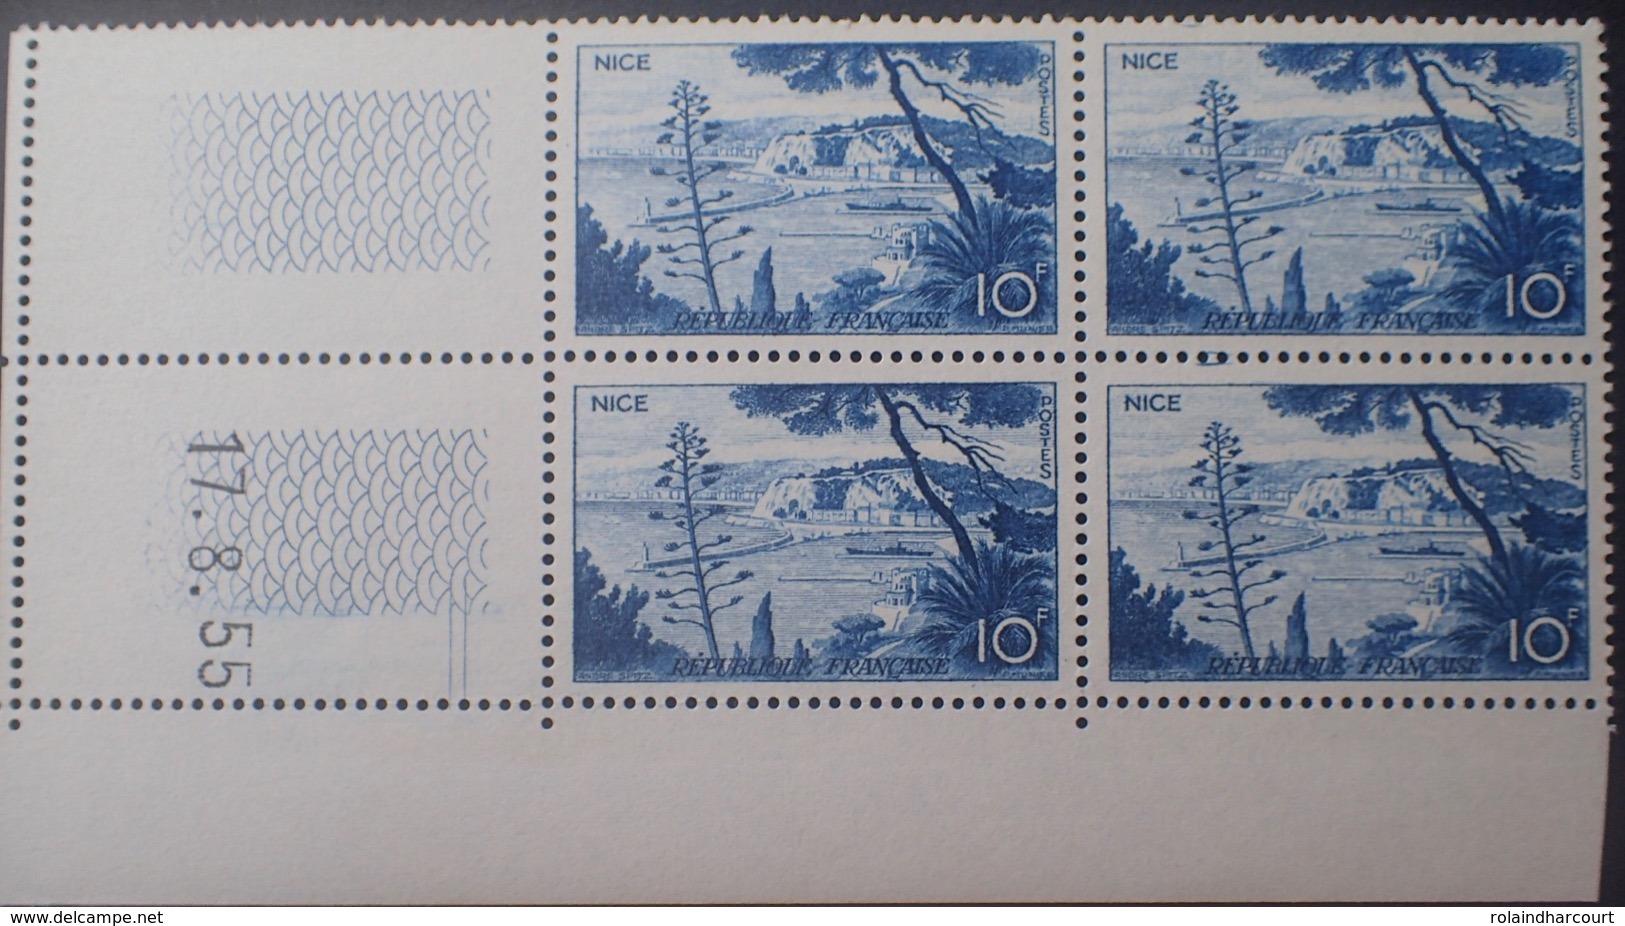 R1949/1287 - 1955 - NICE - N°1038 TIMBRES NEUFS** CdF Date - 1950-1959